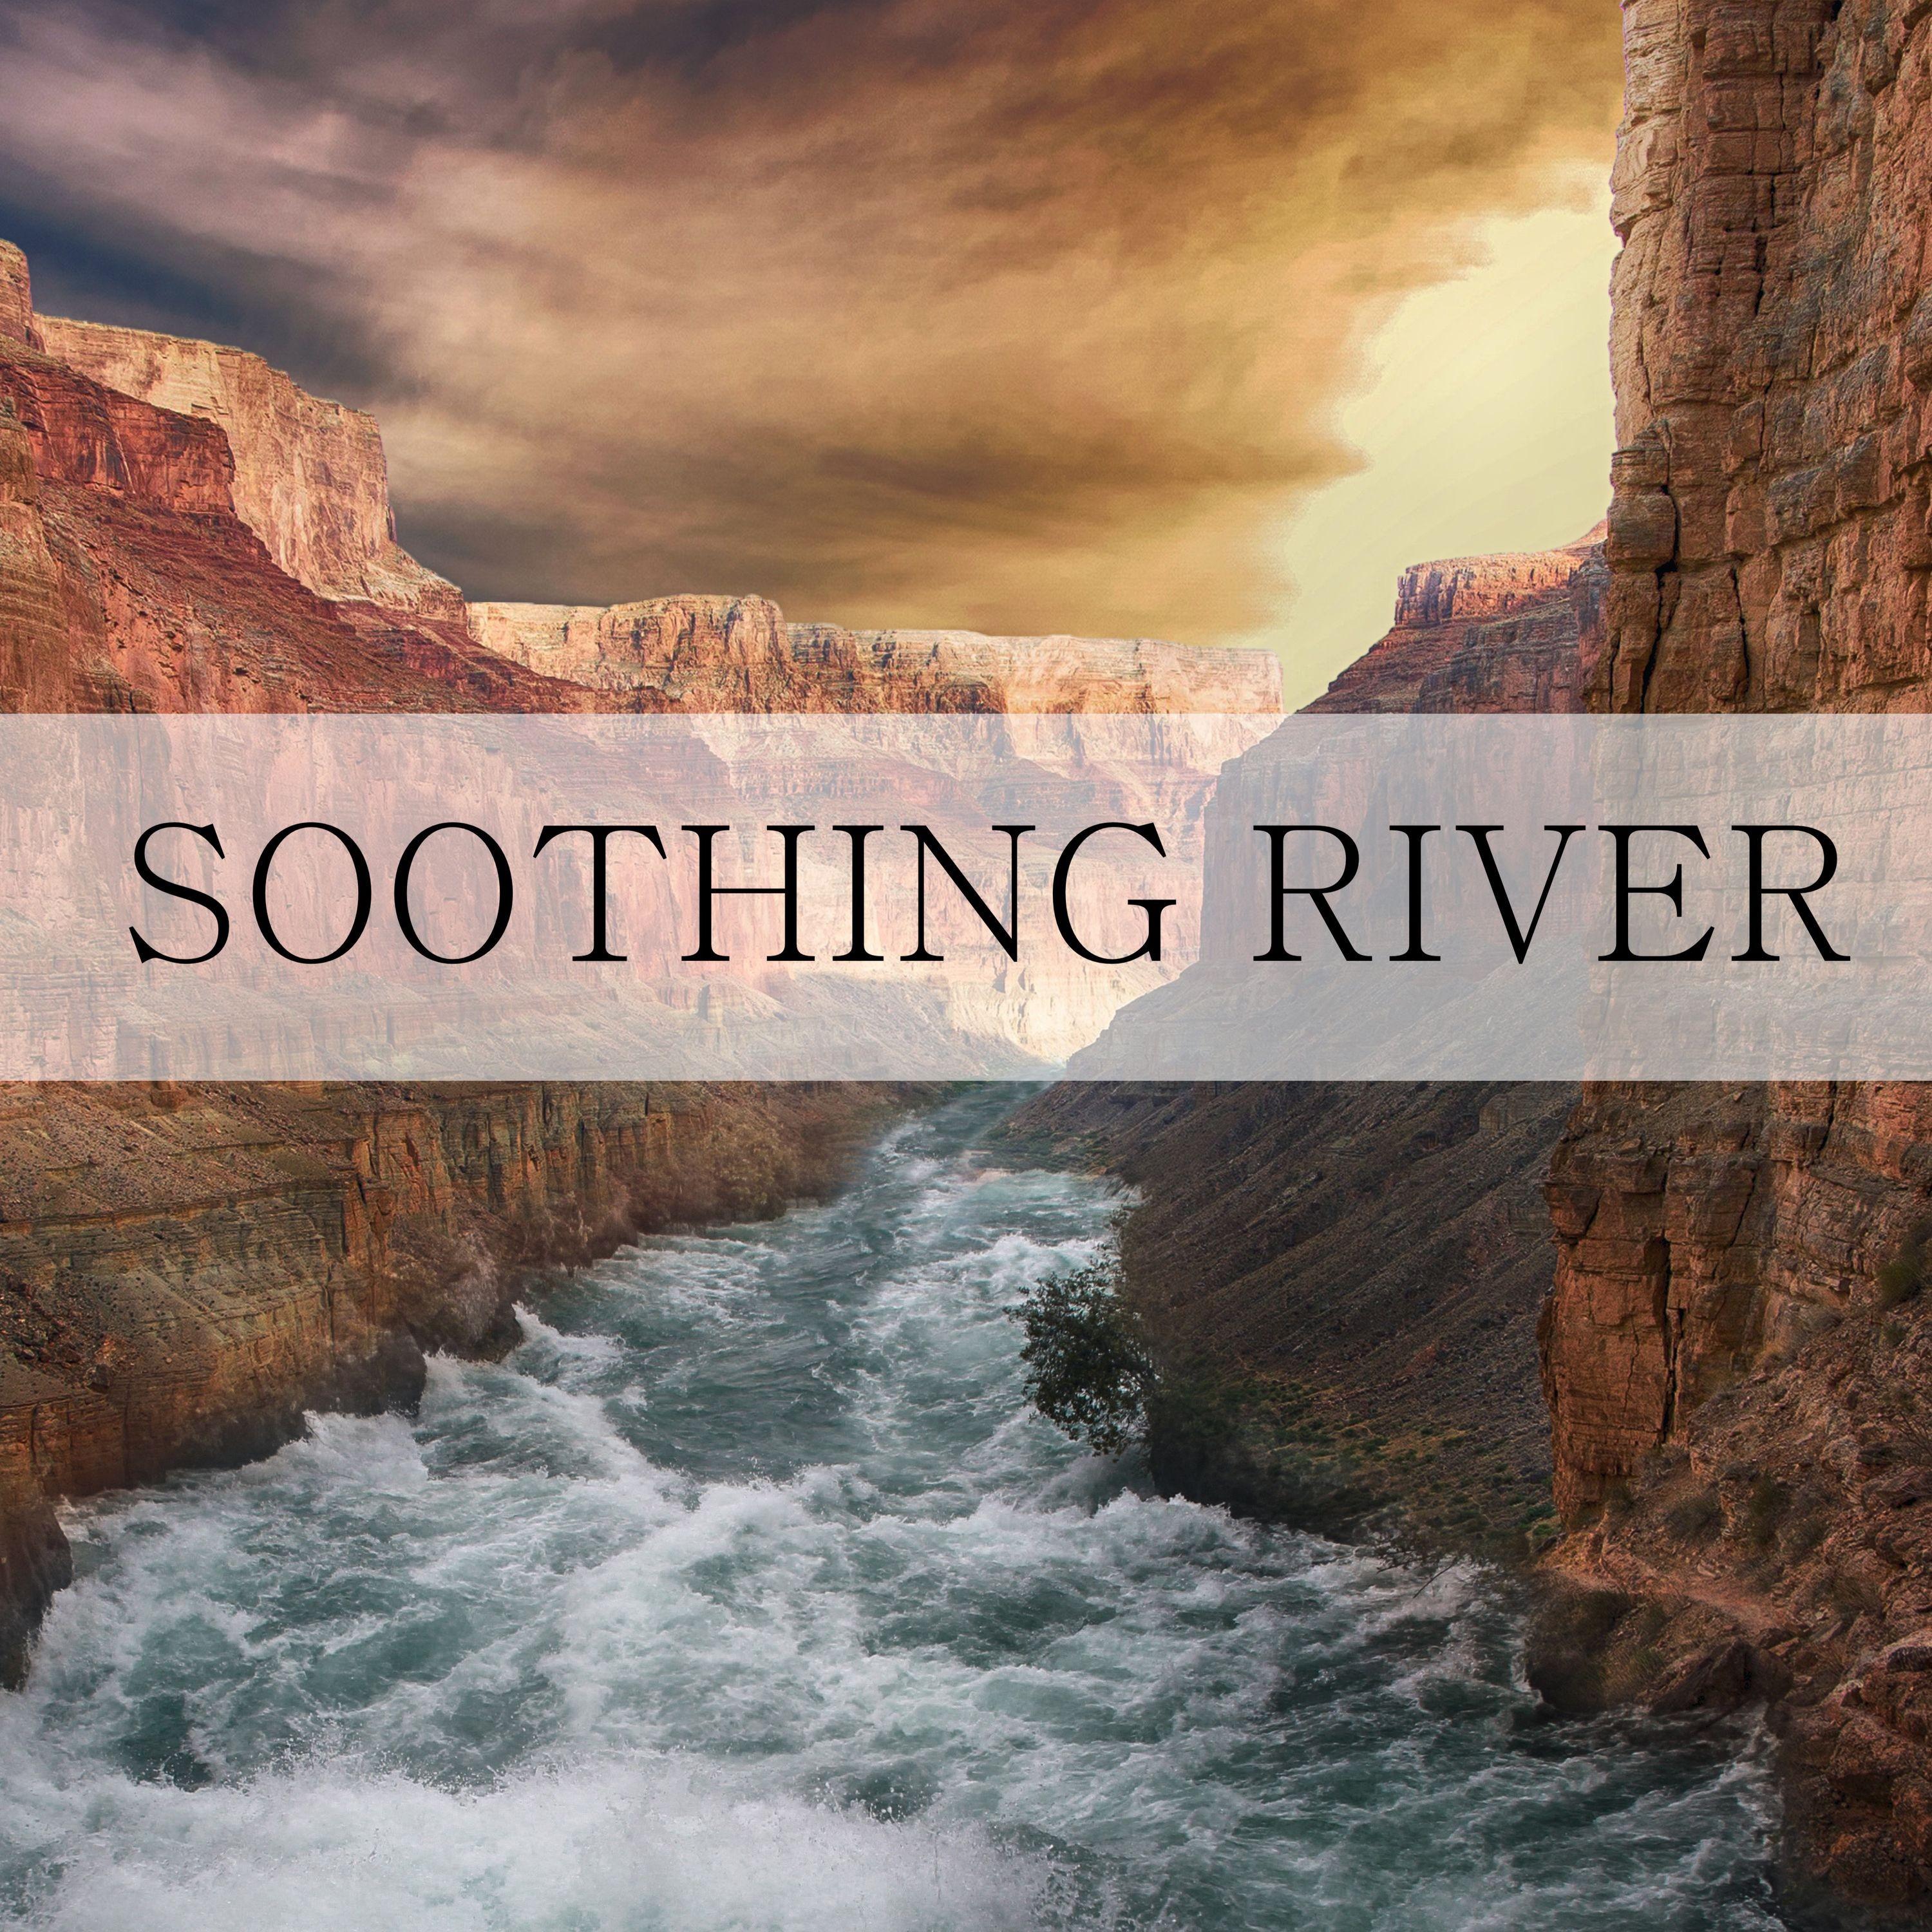 Soothing River